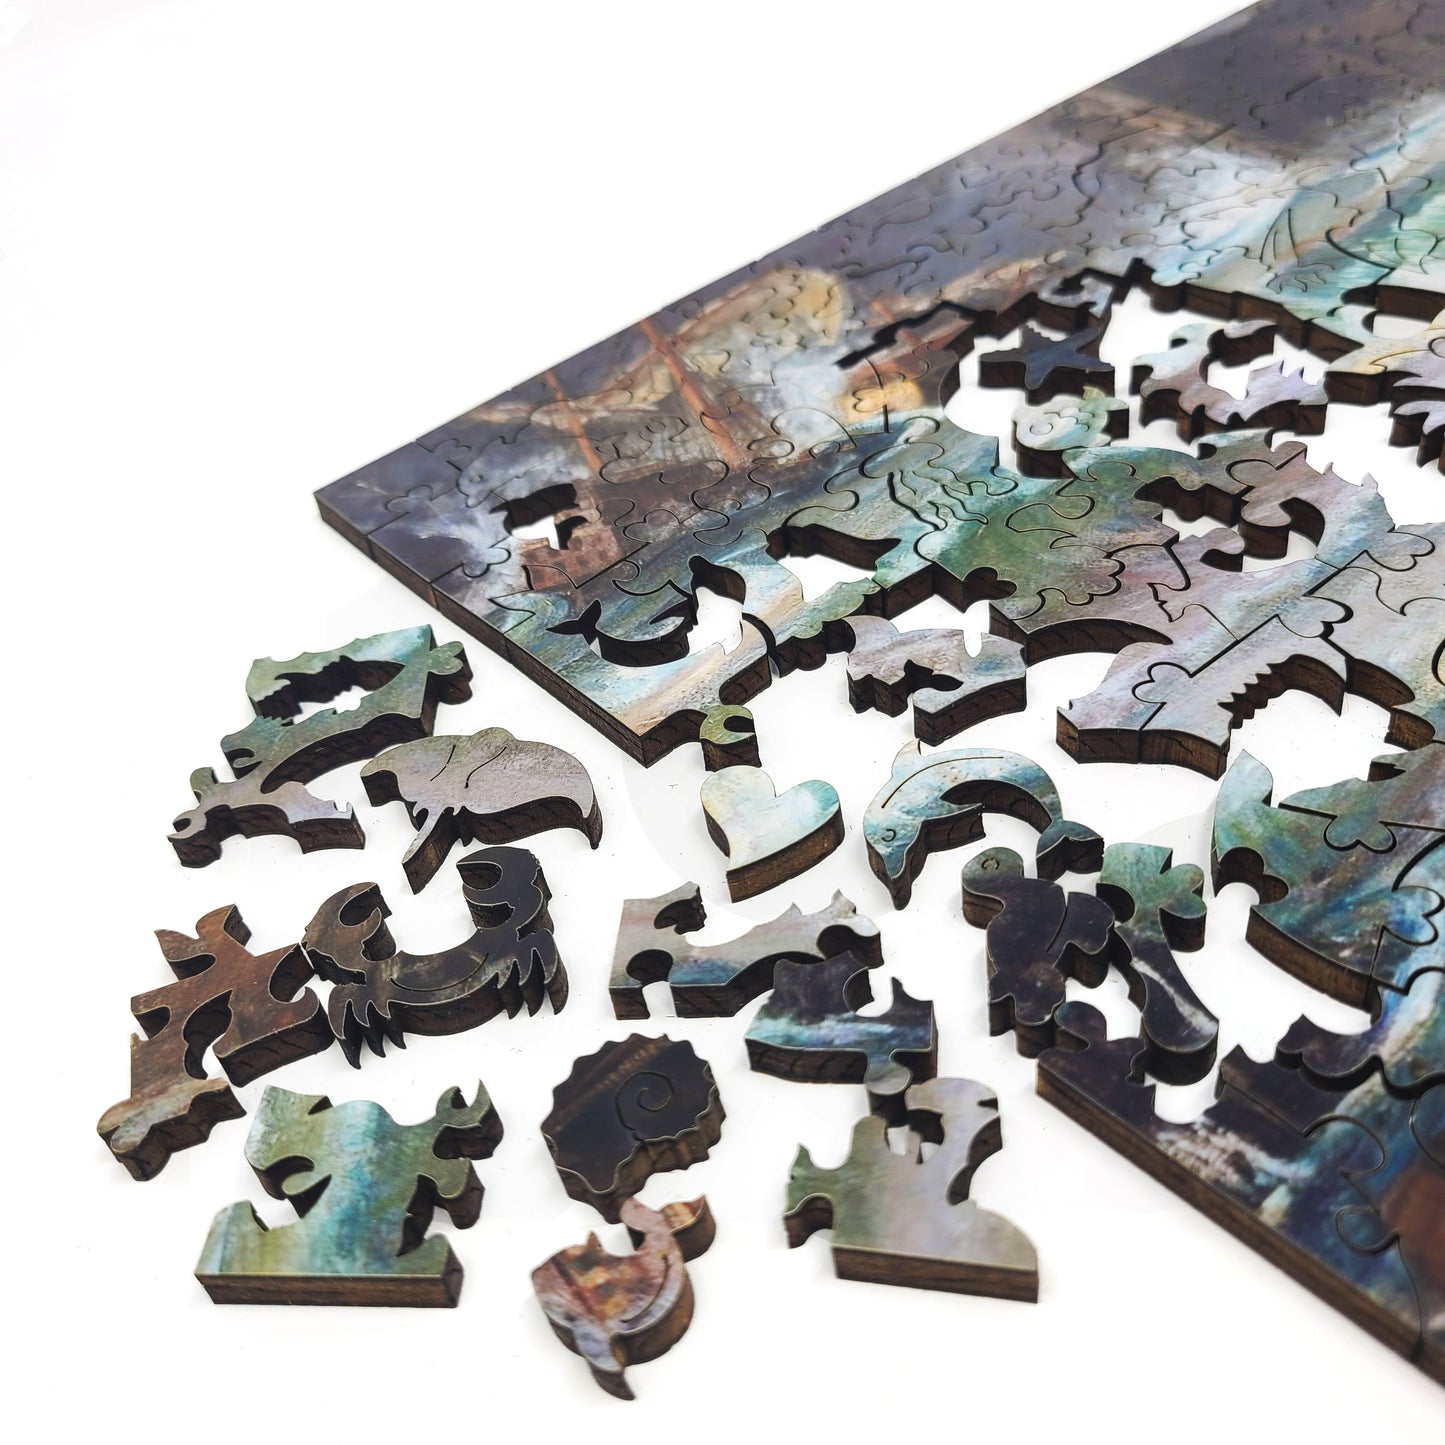 Wooden Jigsaw Puzzle with Uniquely Shaped Pieces for Adults - 386 Pieces - Miranda